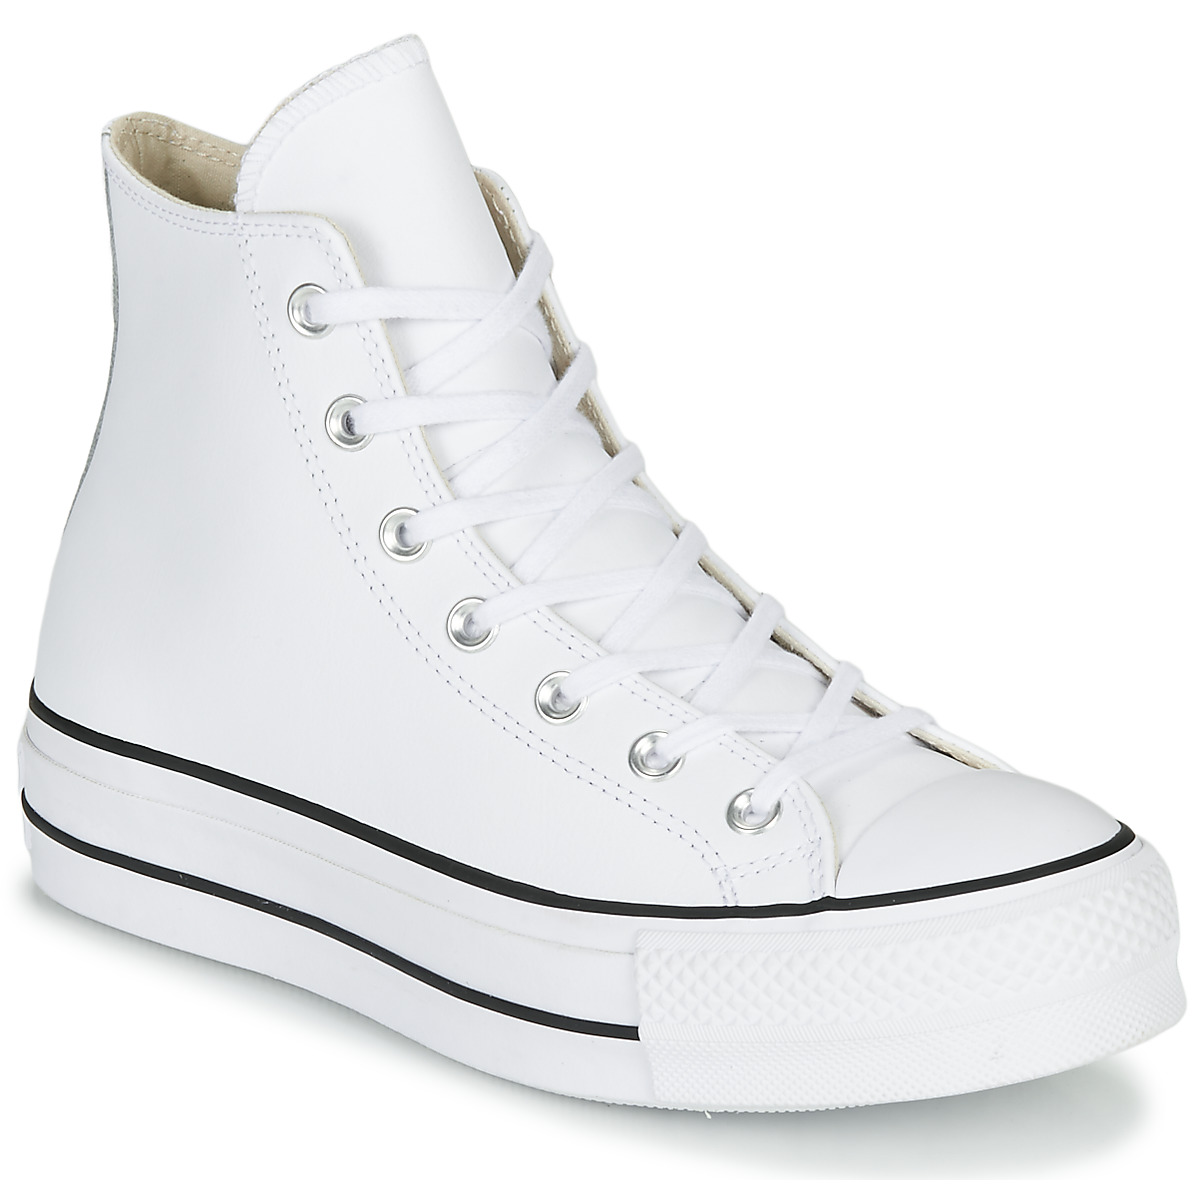 Kengät Converse CHUCK TAYLOR ALL STAR LIFT CLEAN LEATHER HI 38